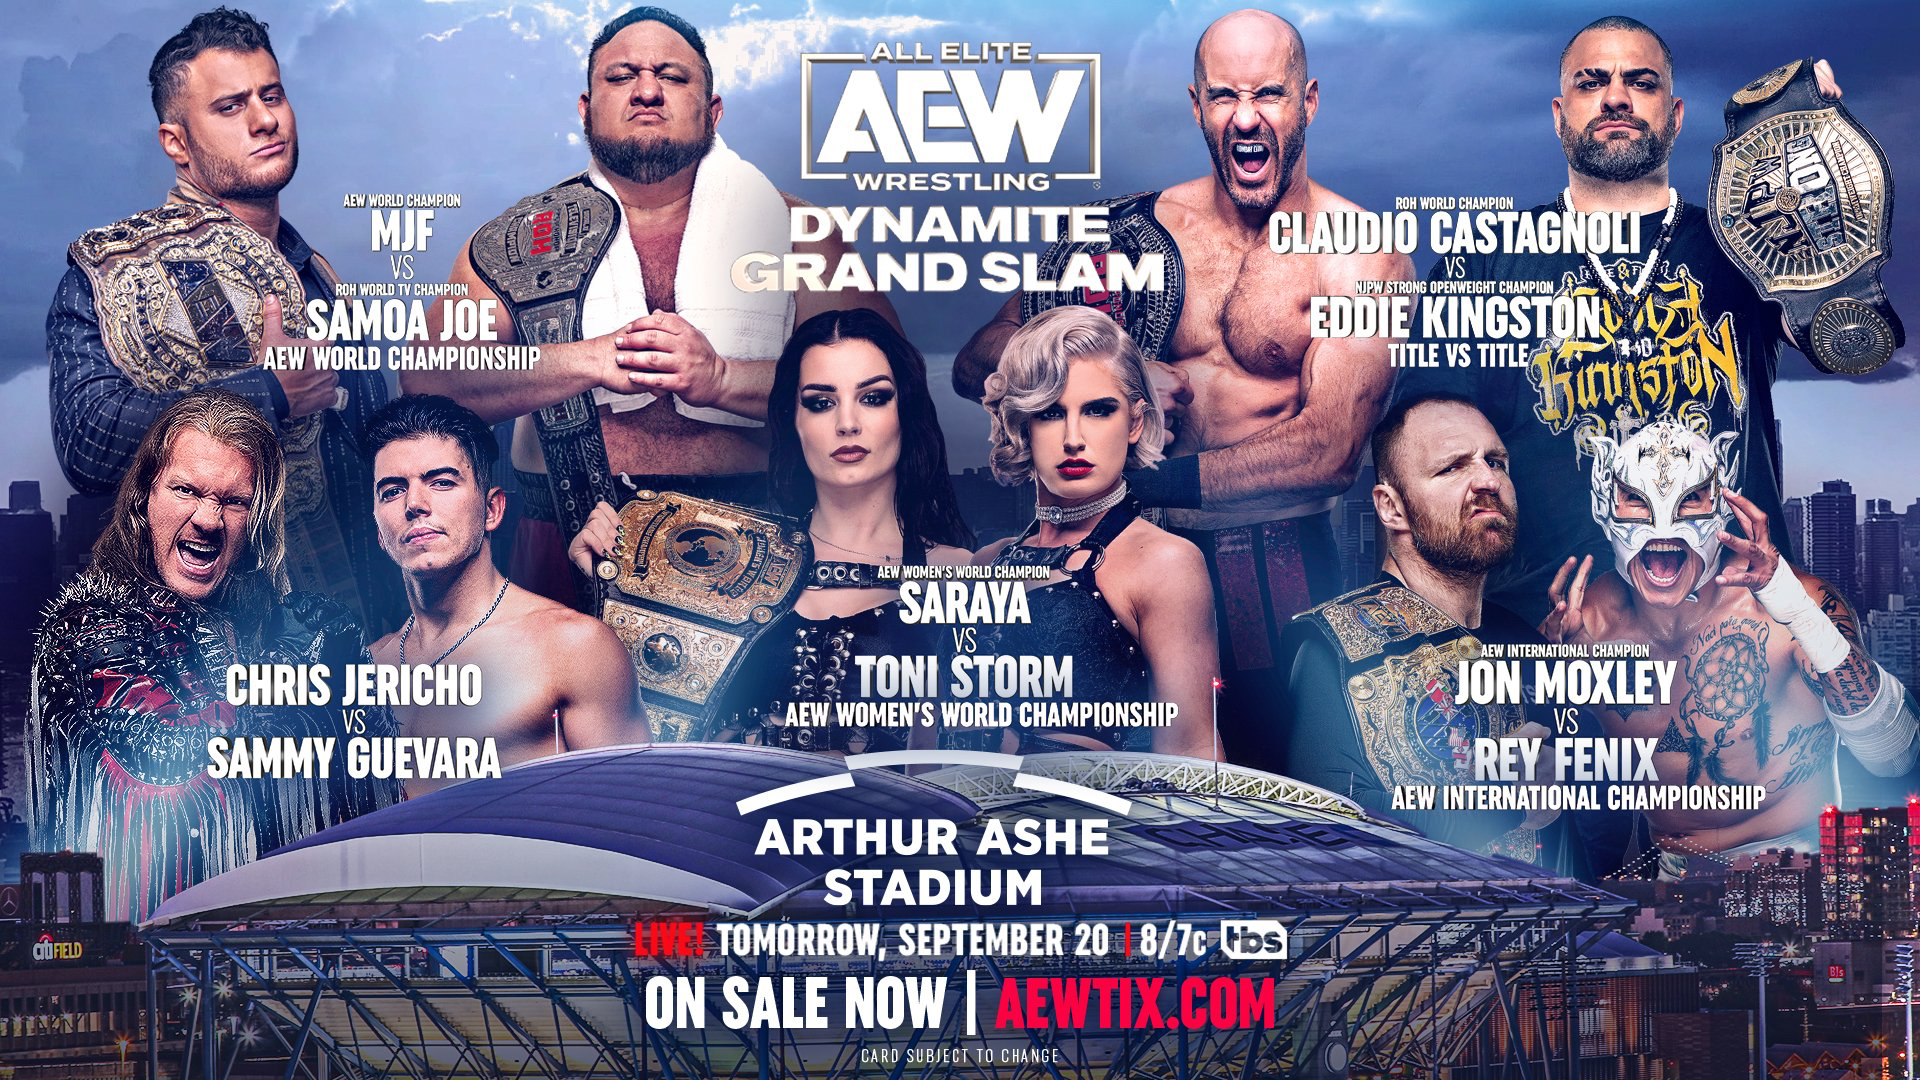 All Elite Wrestling Dynamite Live Results: Who Wins AEW Tag Team Tournament?